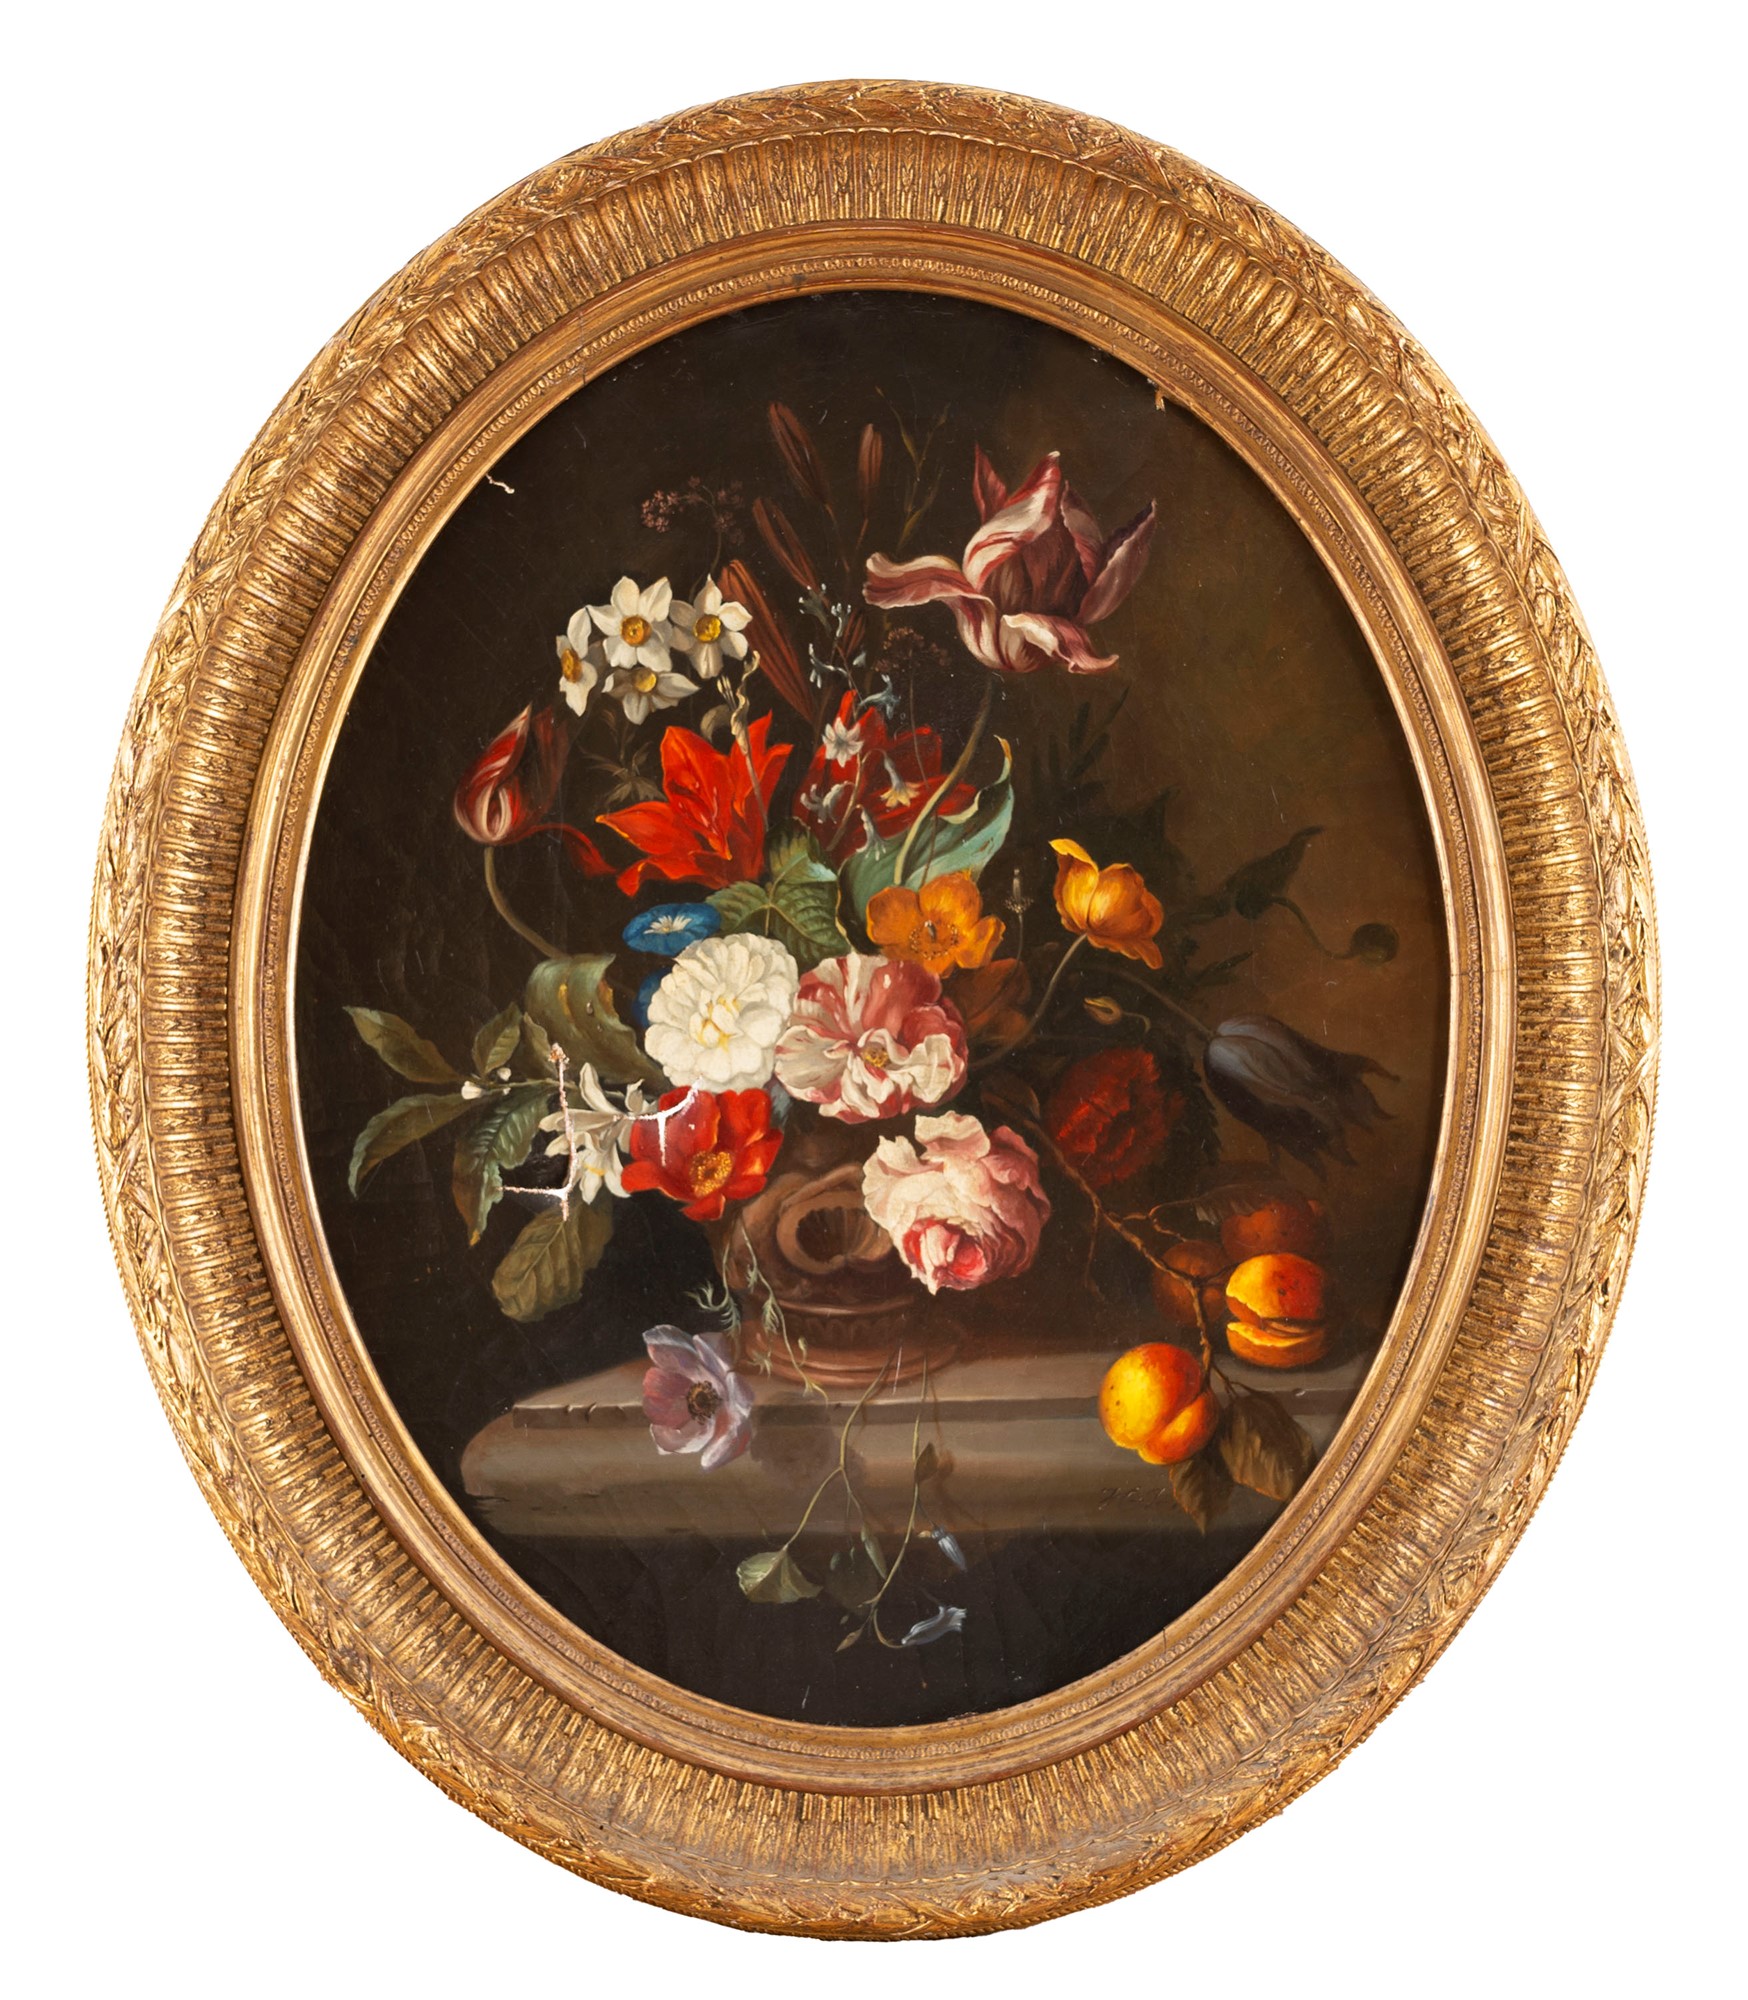 European School, XIX Century - Roses, tulips, daffodils and other flowers in a vase